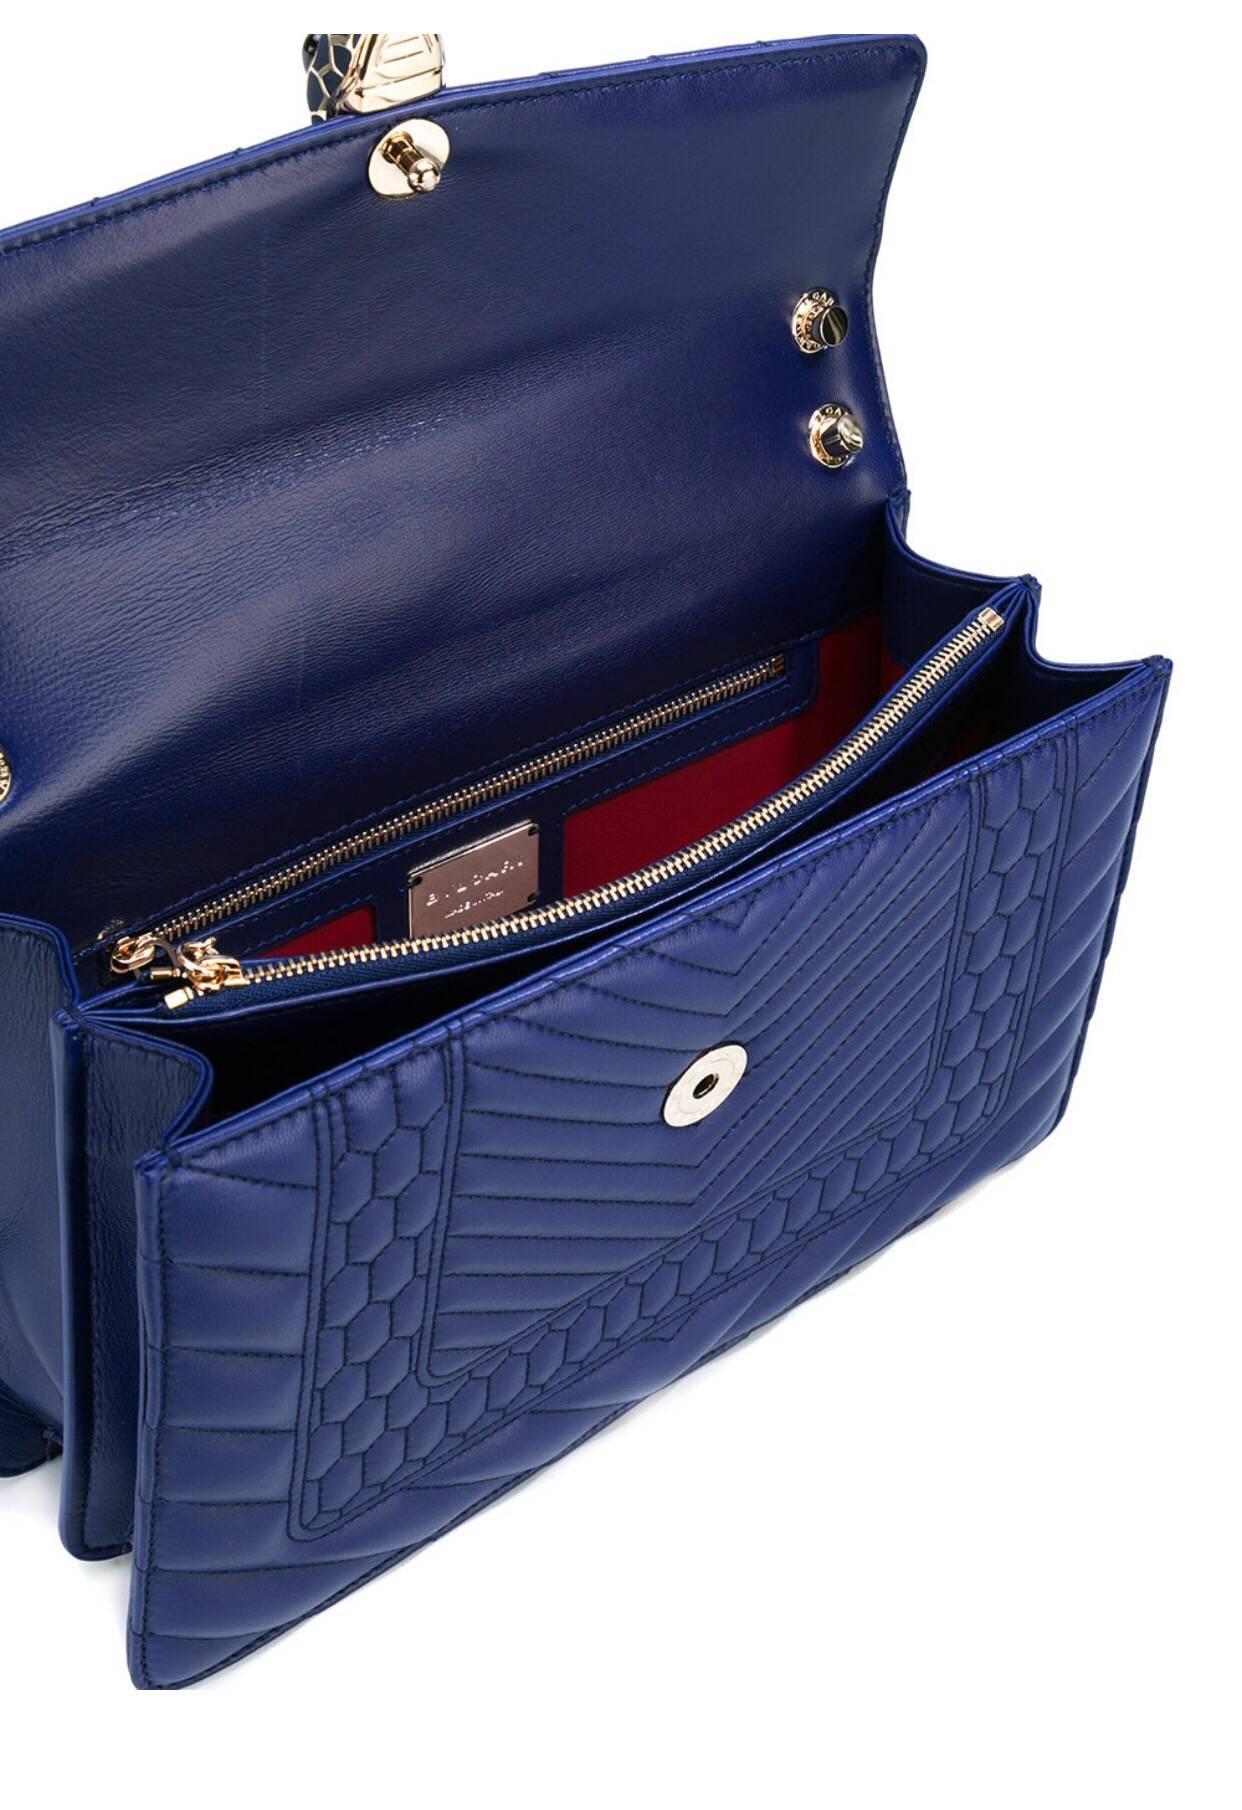     Bulgari calf-leather shoulder bag
    Clasp fastening at front
    Fold-over design, 'quilted Scaglie' finish, matte Serpenti head closure, snake body chain strap, internal pockets, tag and mirror, fully lined
    100% calf leather
Color Blue 
 